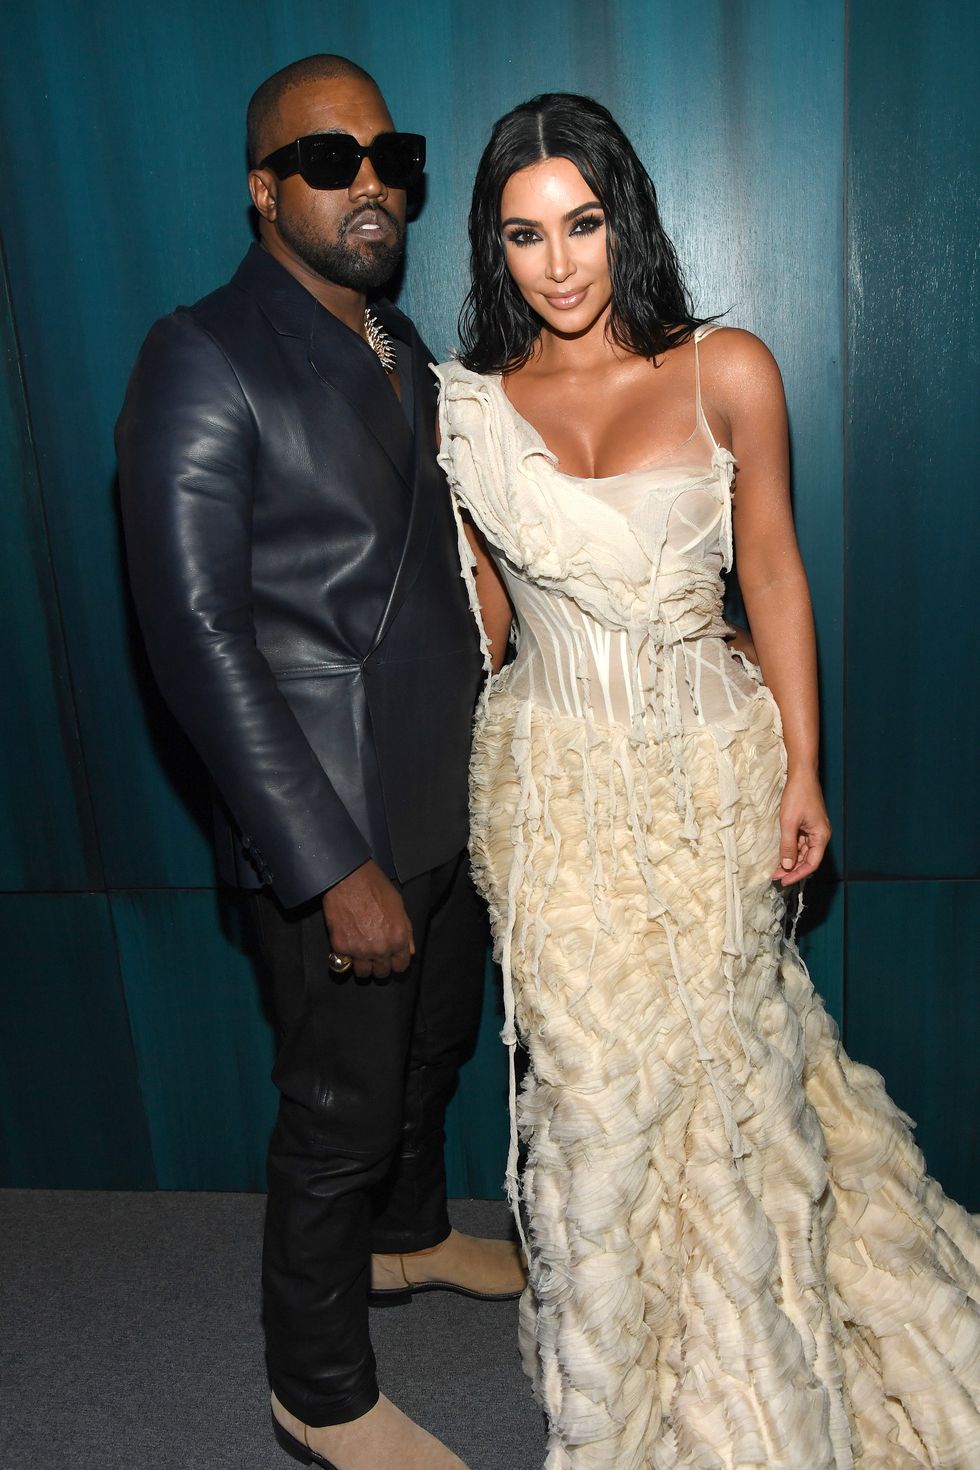 kanye west called out will smith and jada in interview about kim kardashian